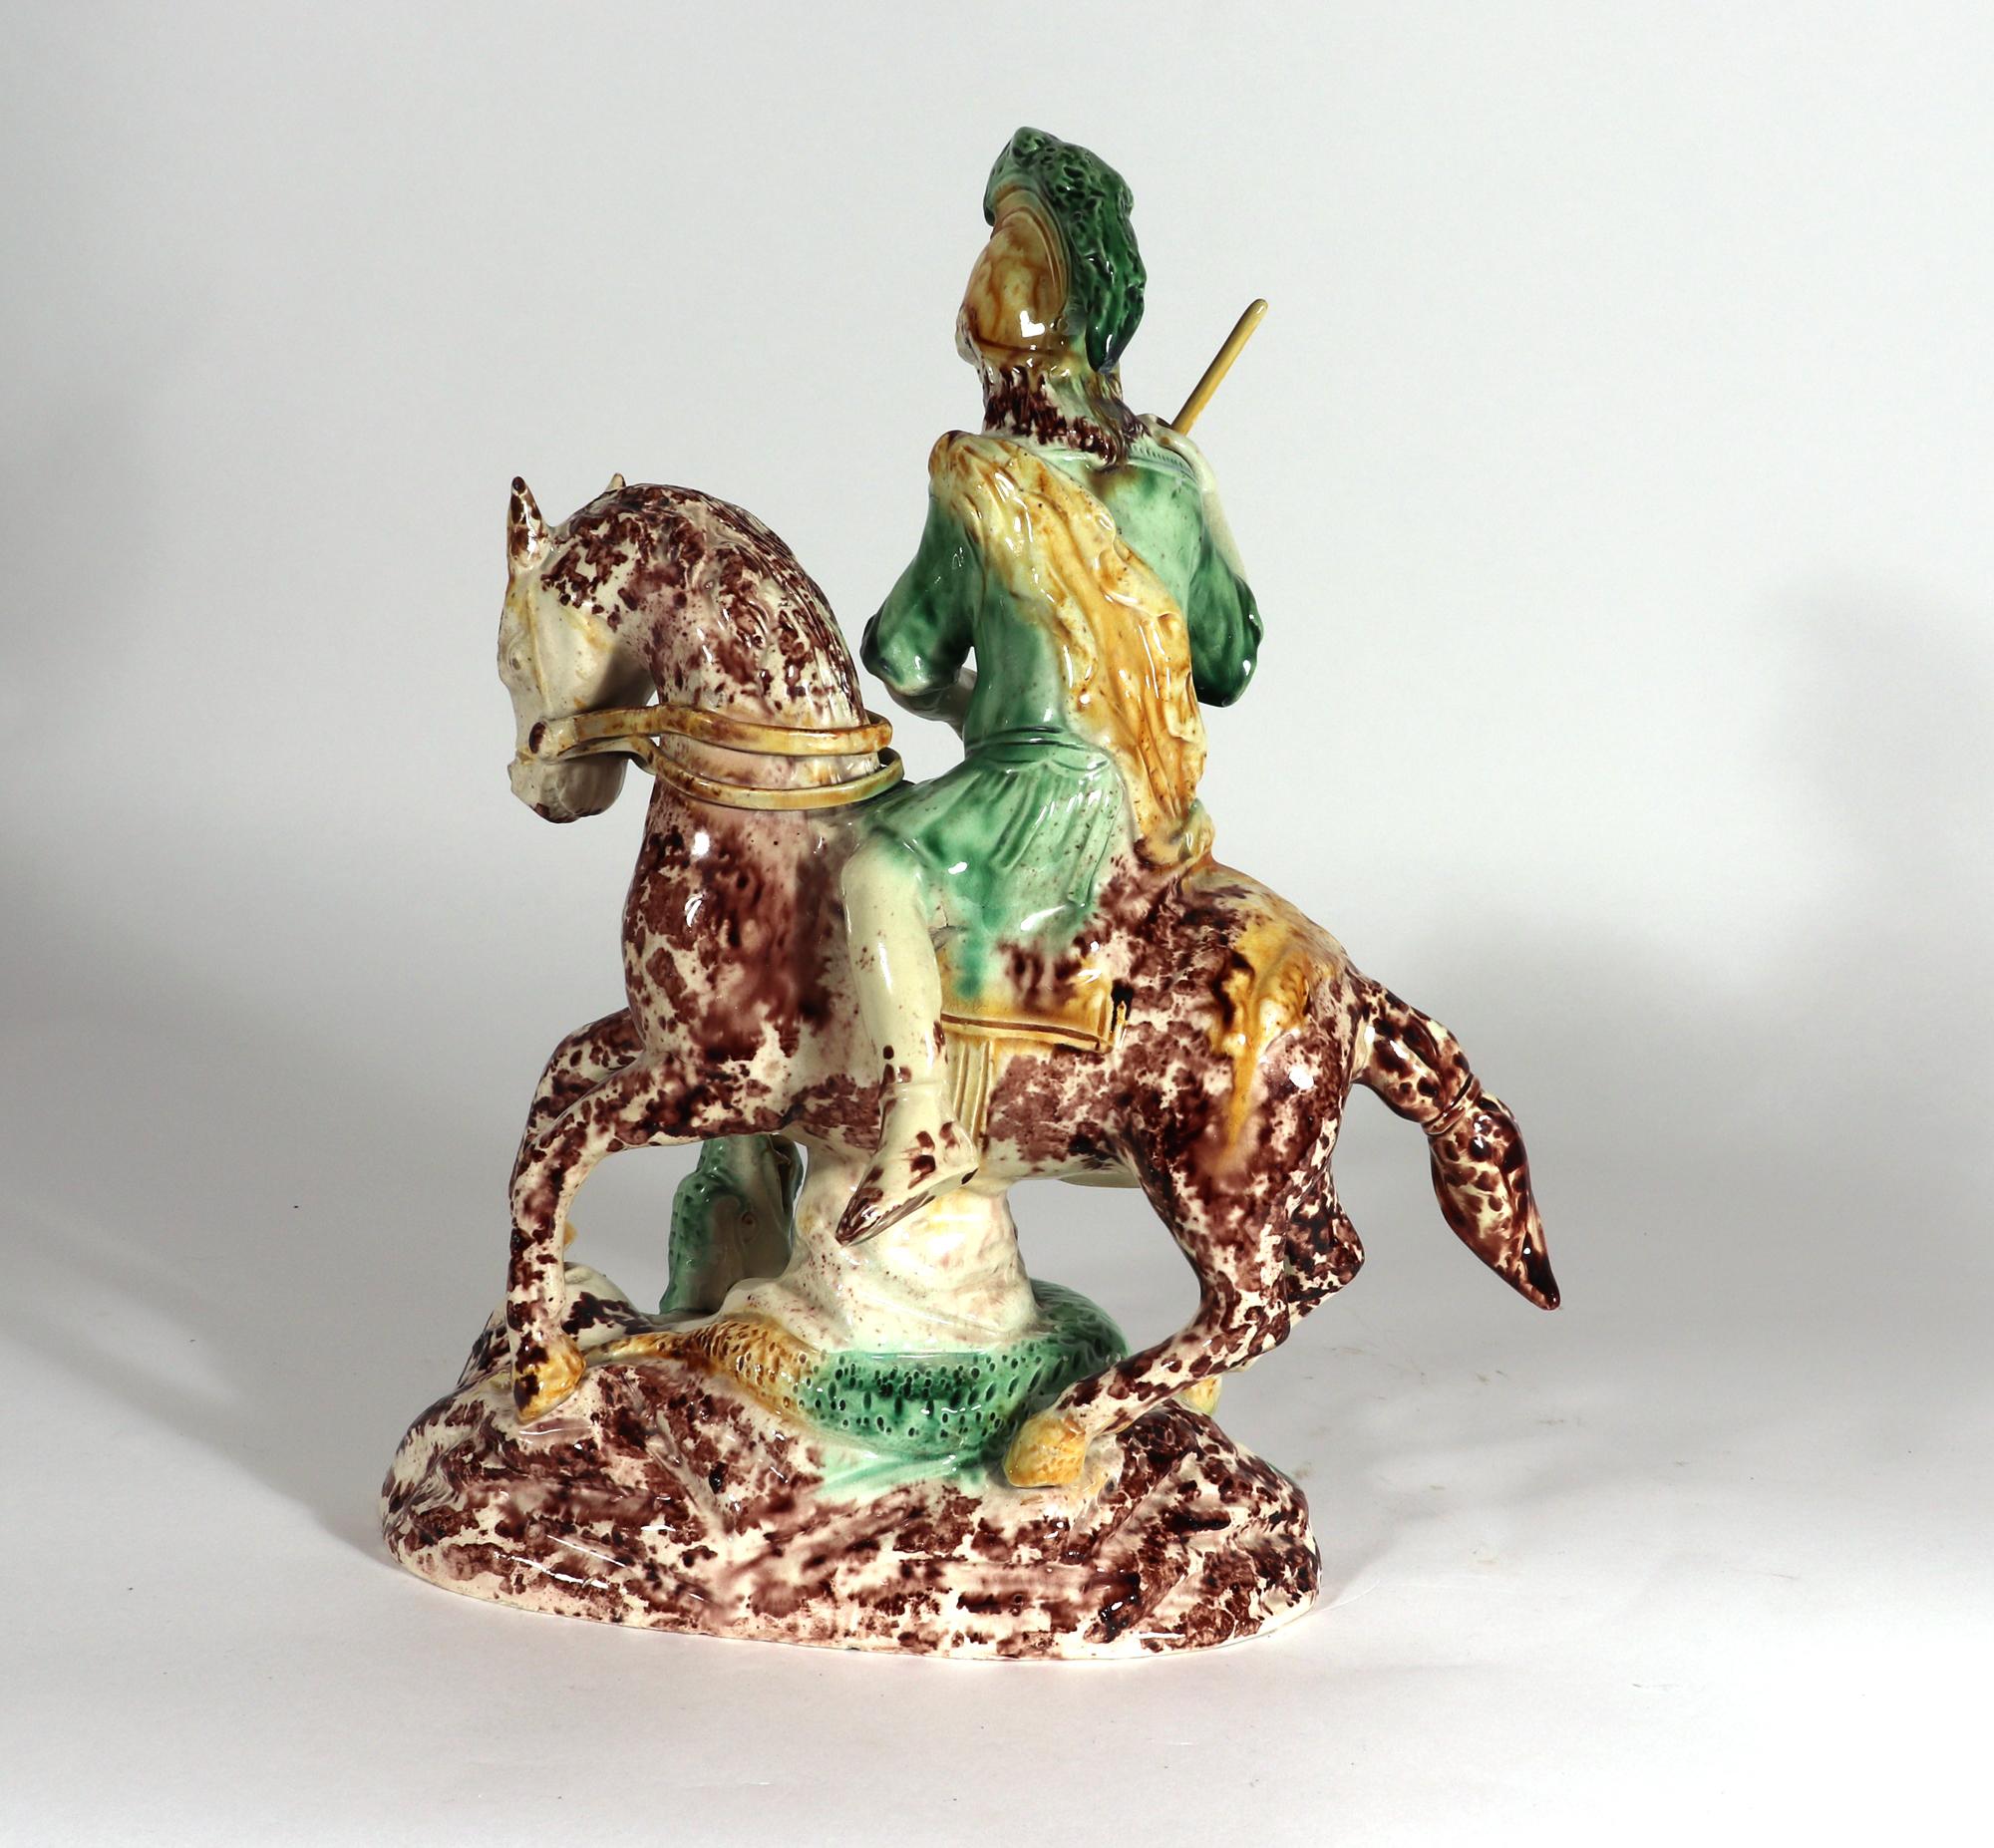 English Pottery Lead-glazed Earthenware Figure of St. George and the Dragon 2